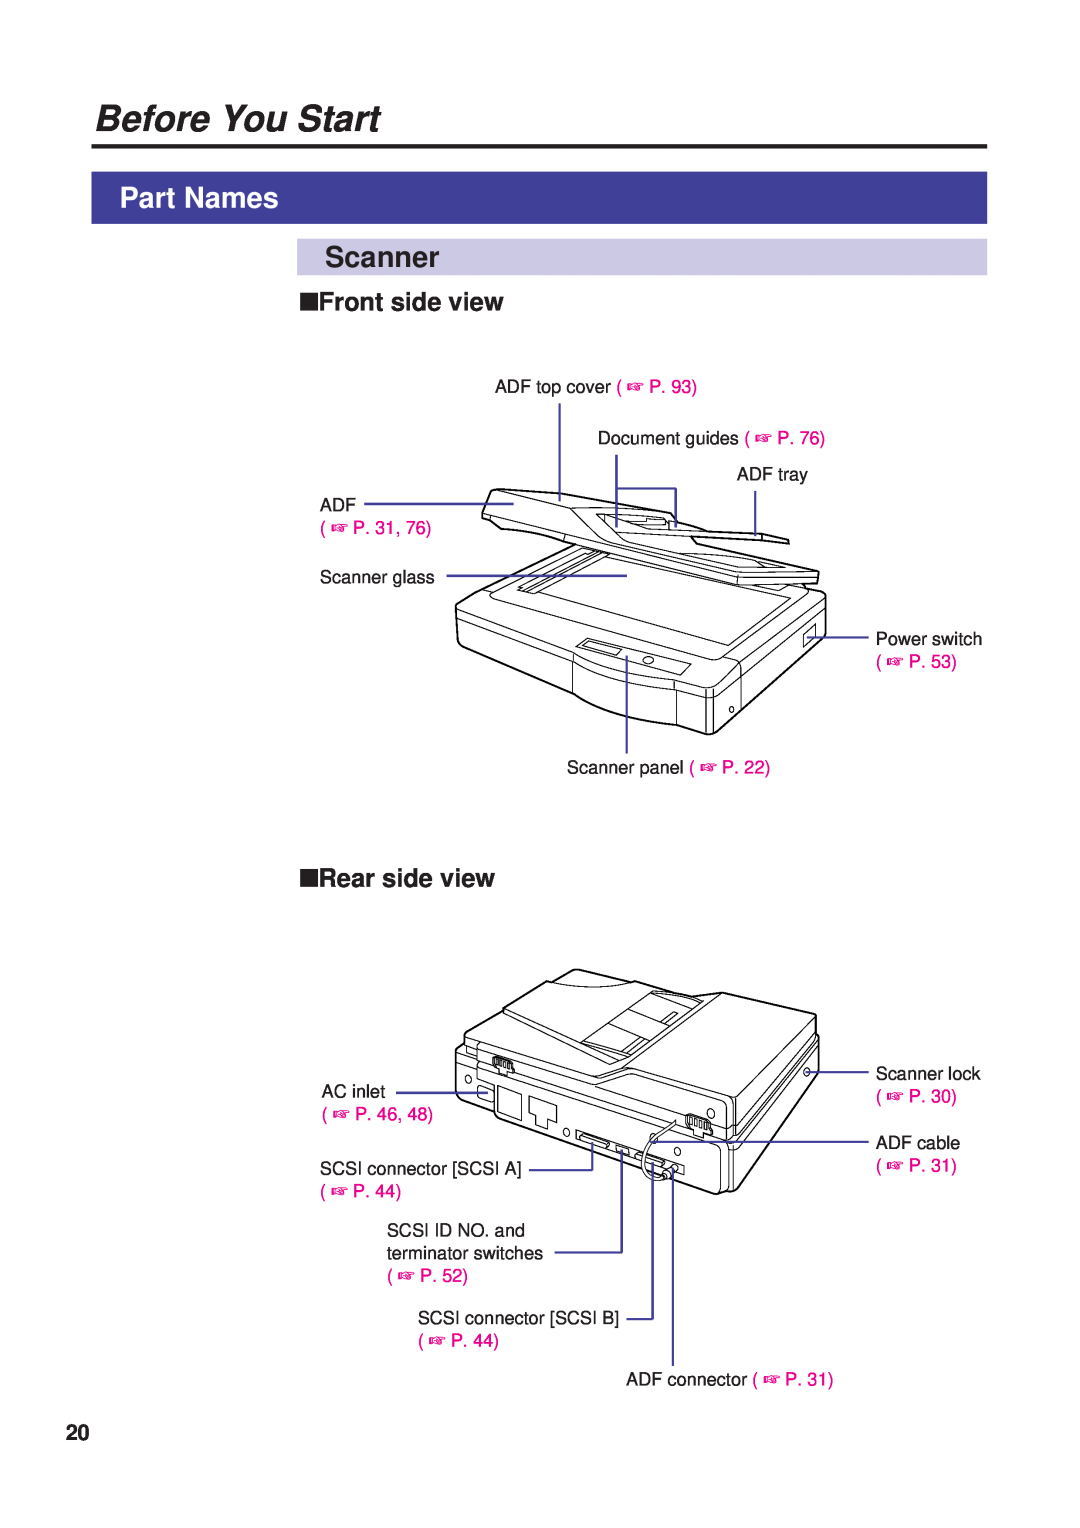 Panasonic KX-PS8000 manual Part Names, Scanner, Front side view, Rear side view, Before You Start 